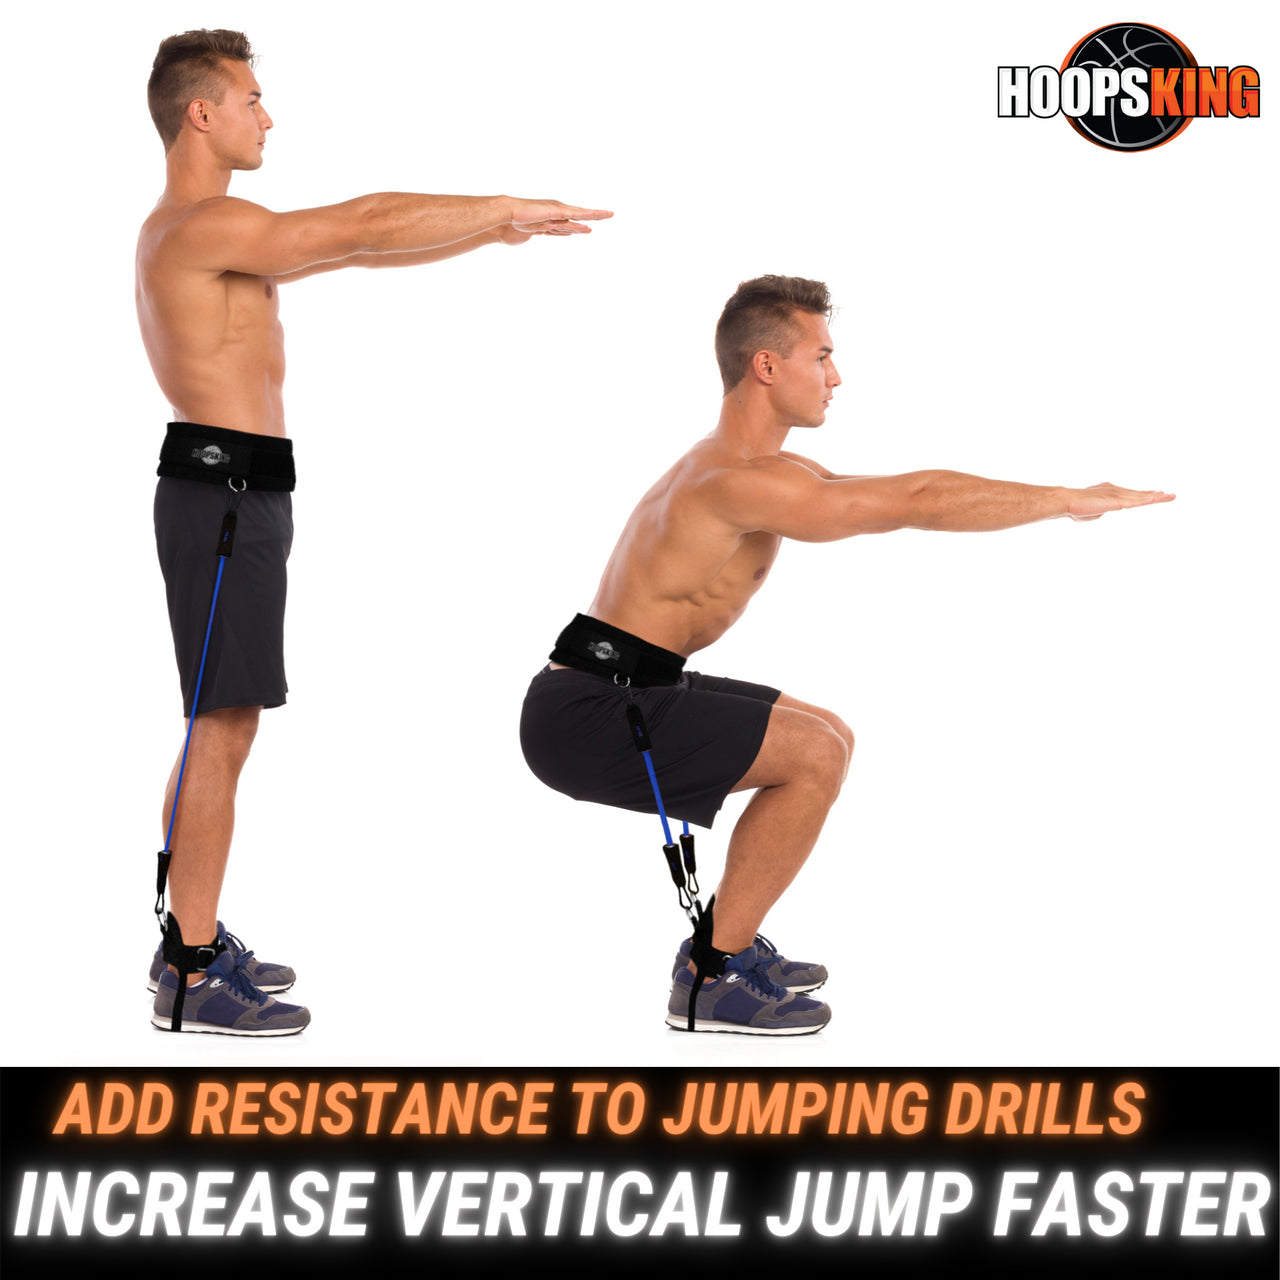 Increase vertical jump with resistance bands